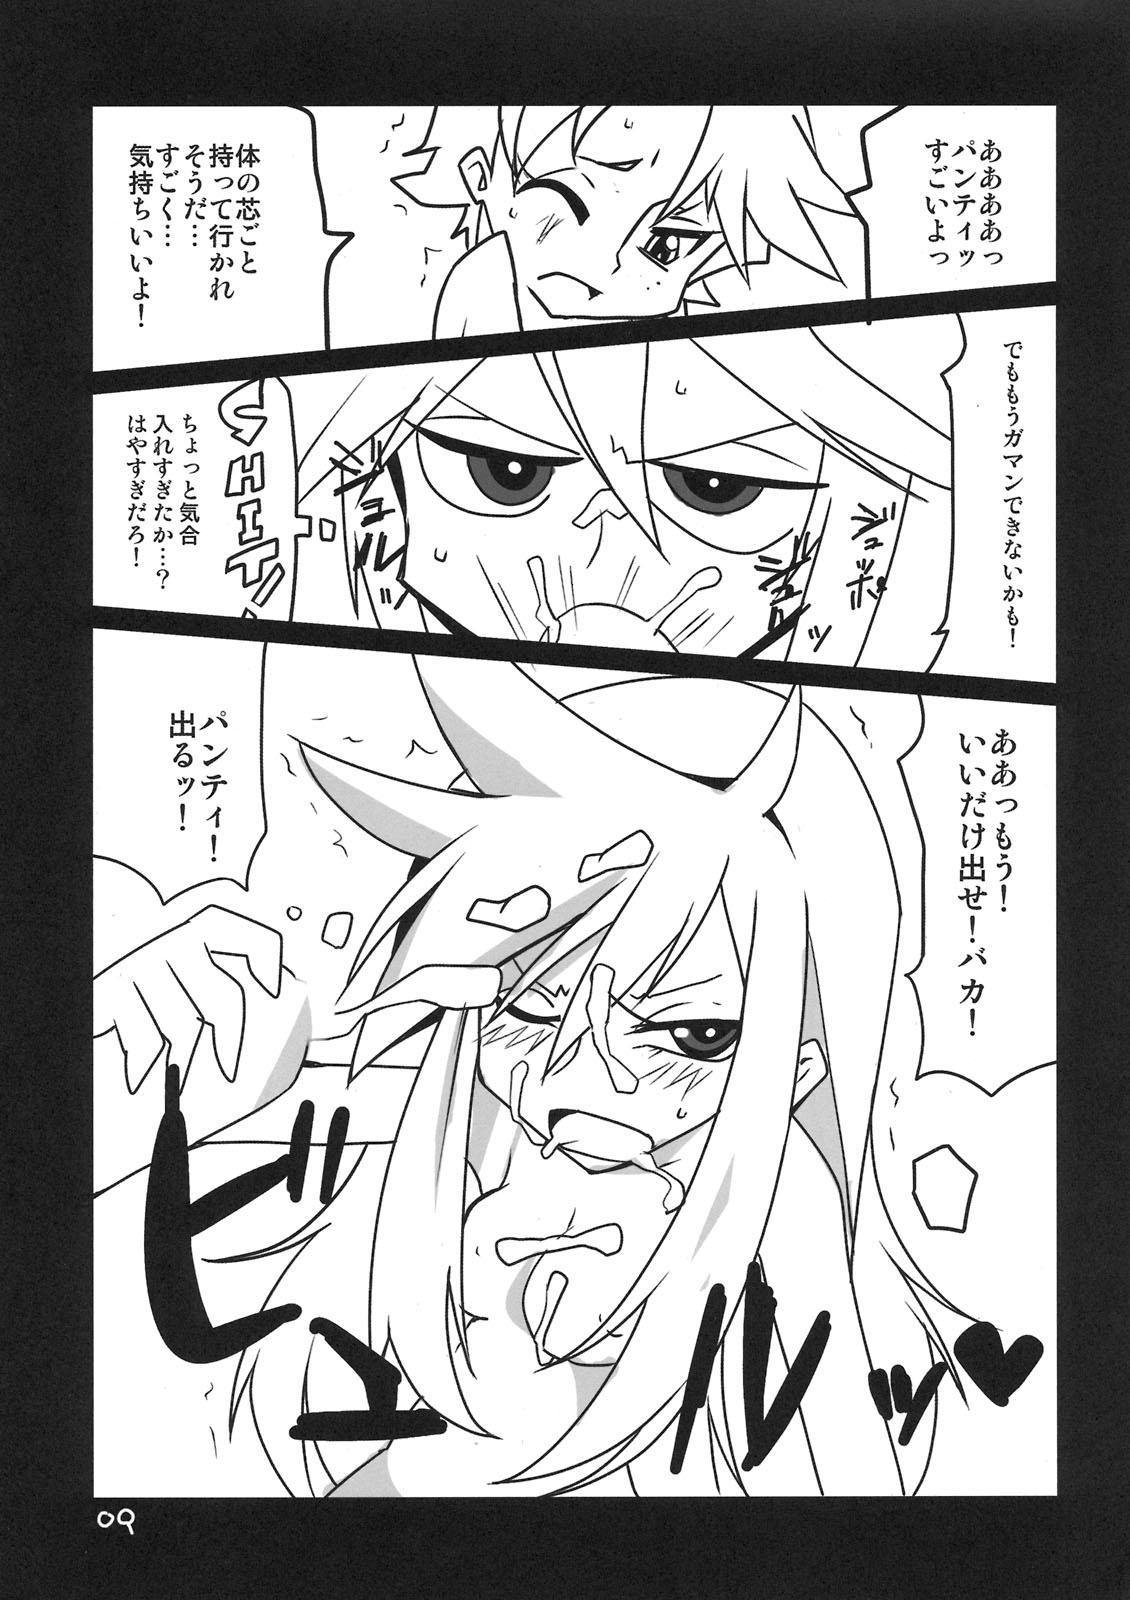 Voyeursex Panty & Stocking Portable - Panty and stocking with garterbelt Pierced - Page 9